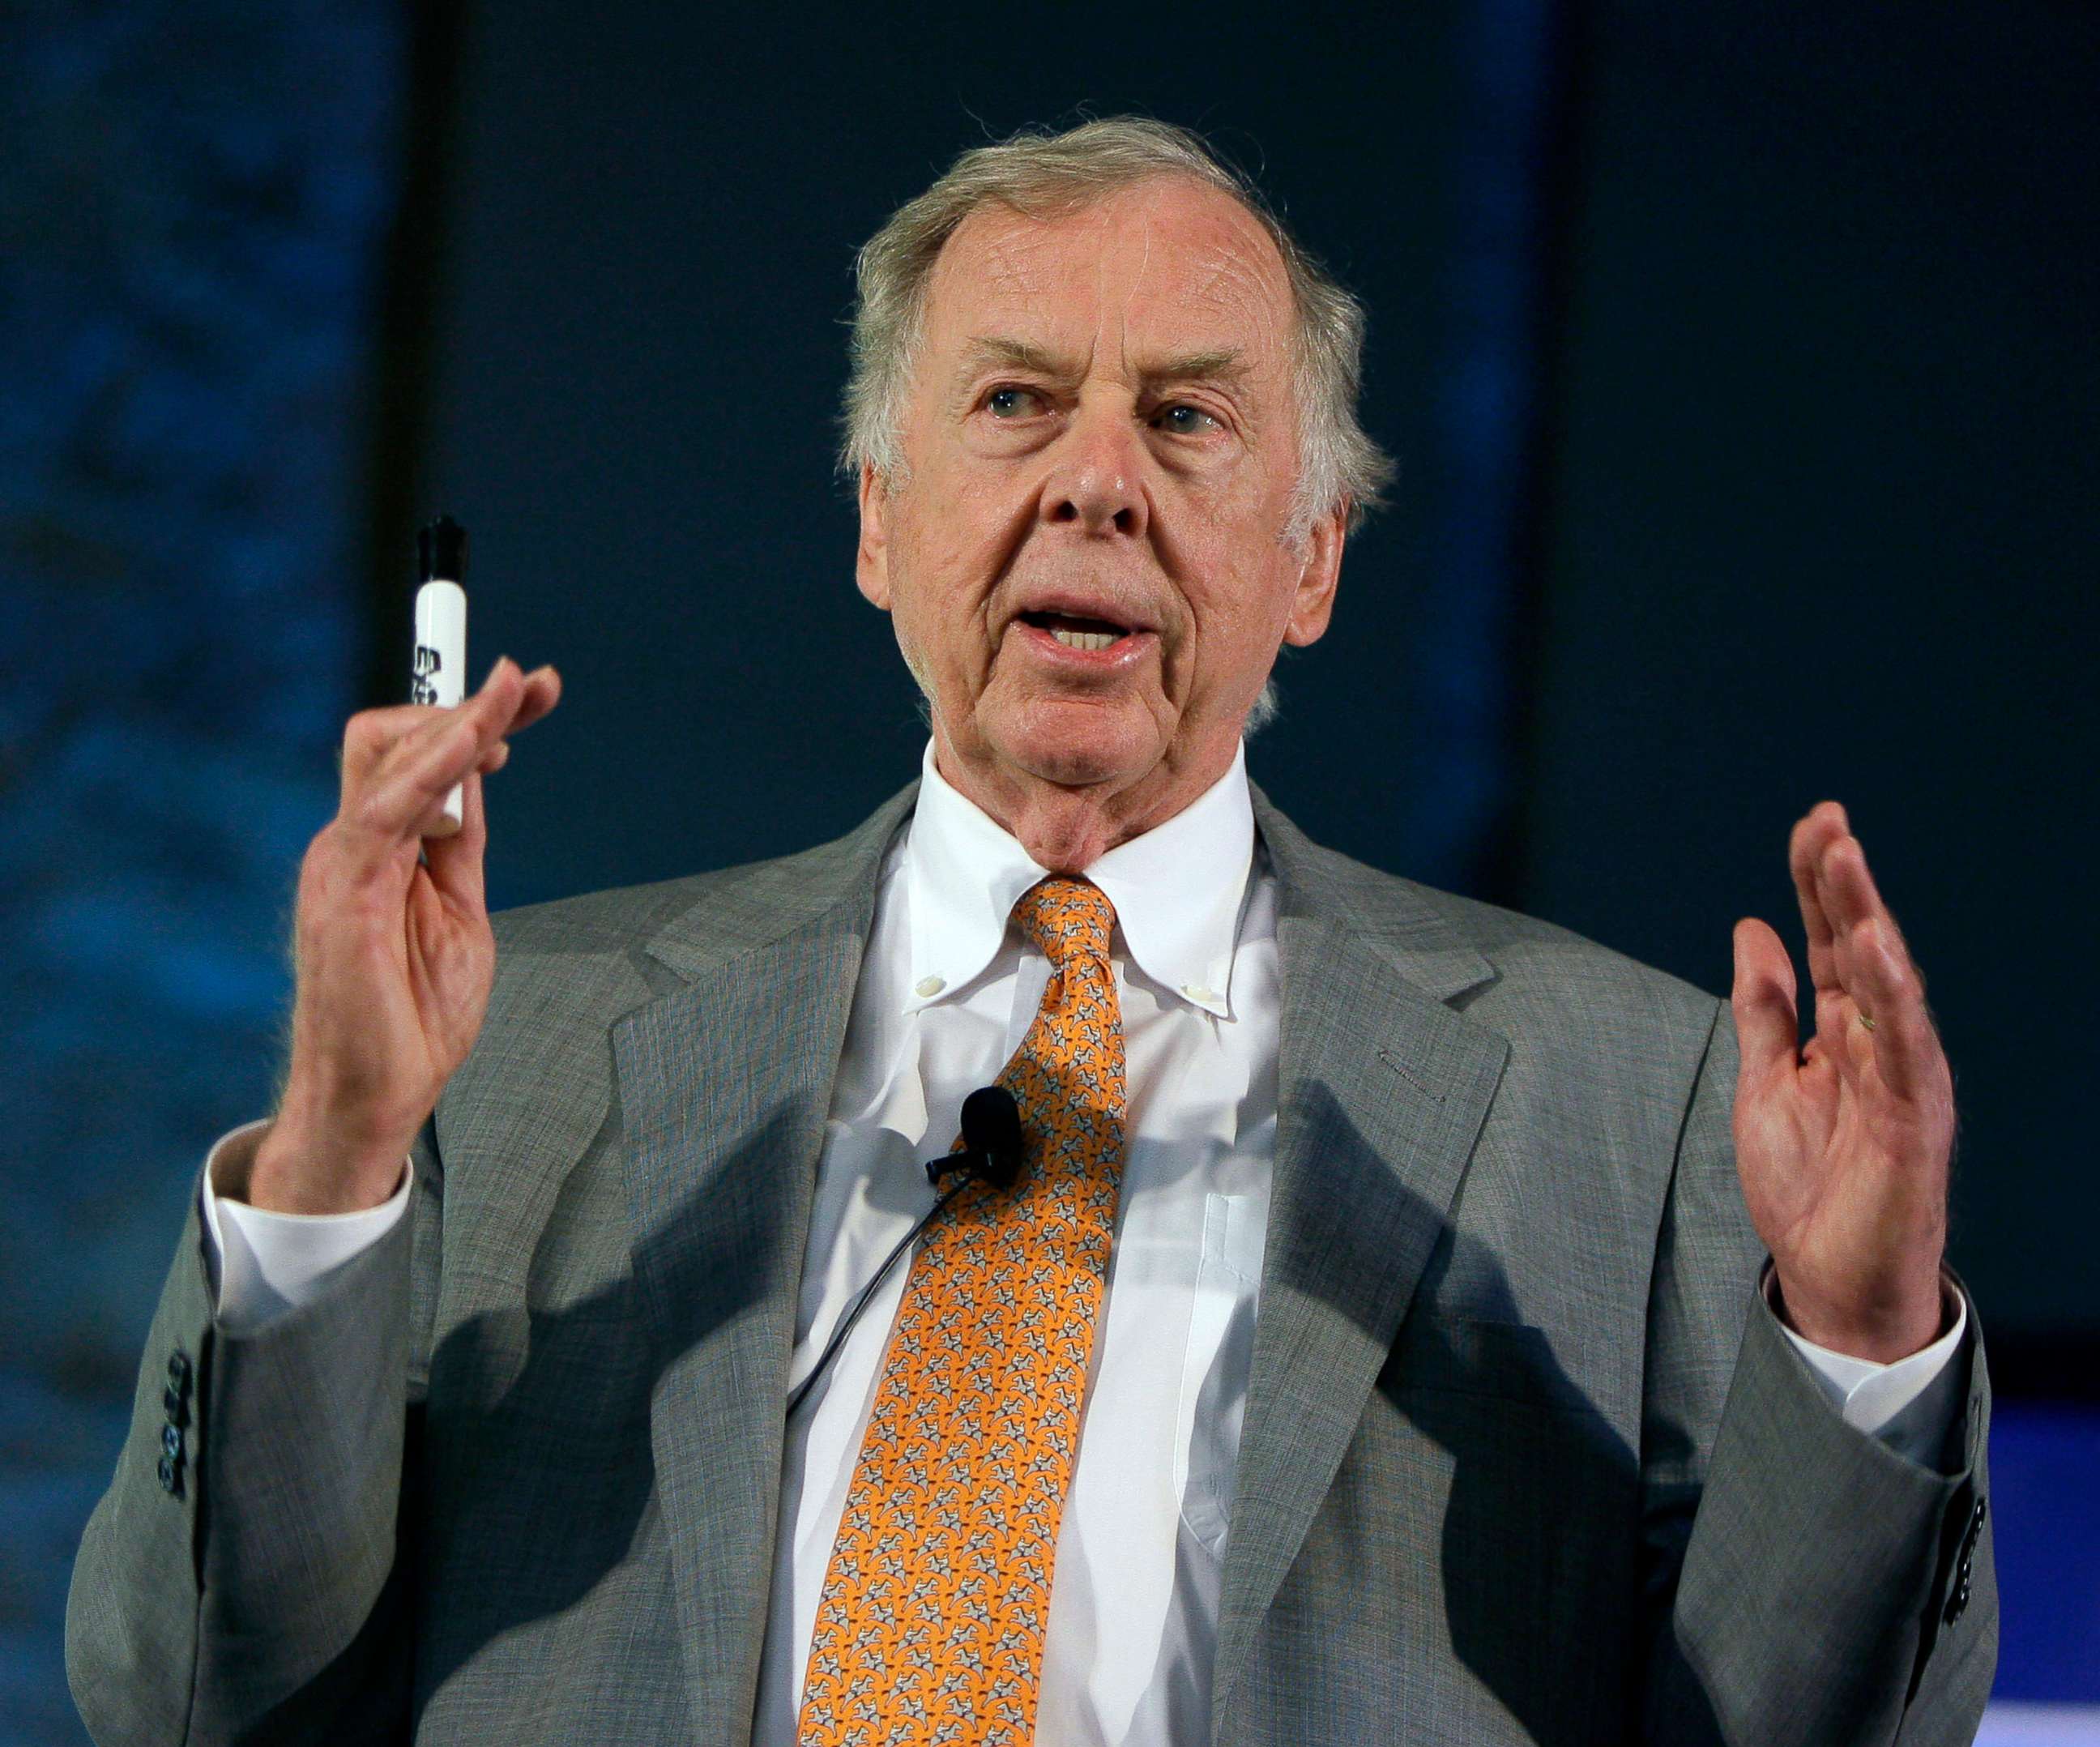 PHOTO: Oil and gas developer T. Boone Pickens addresses a town hall meeting on energy independence in Topeka, Kan., July 30, 2008.